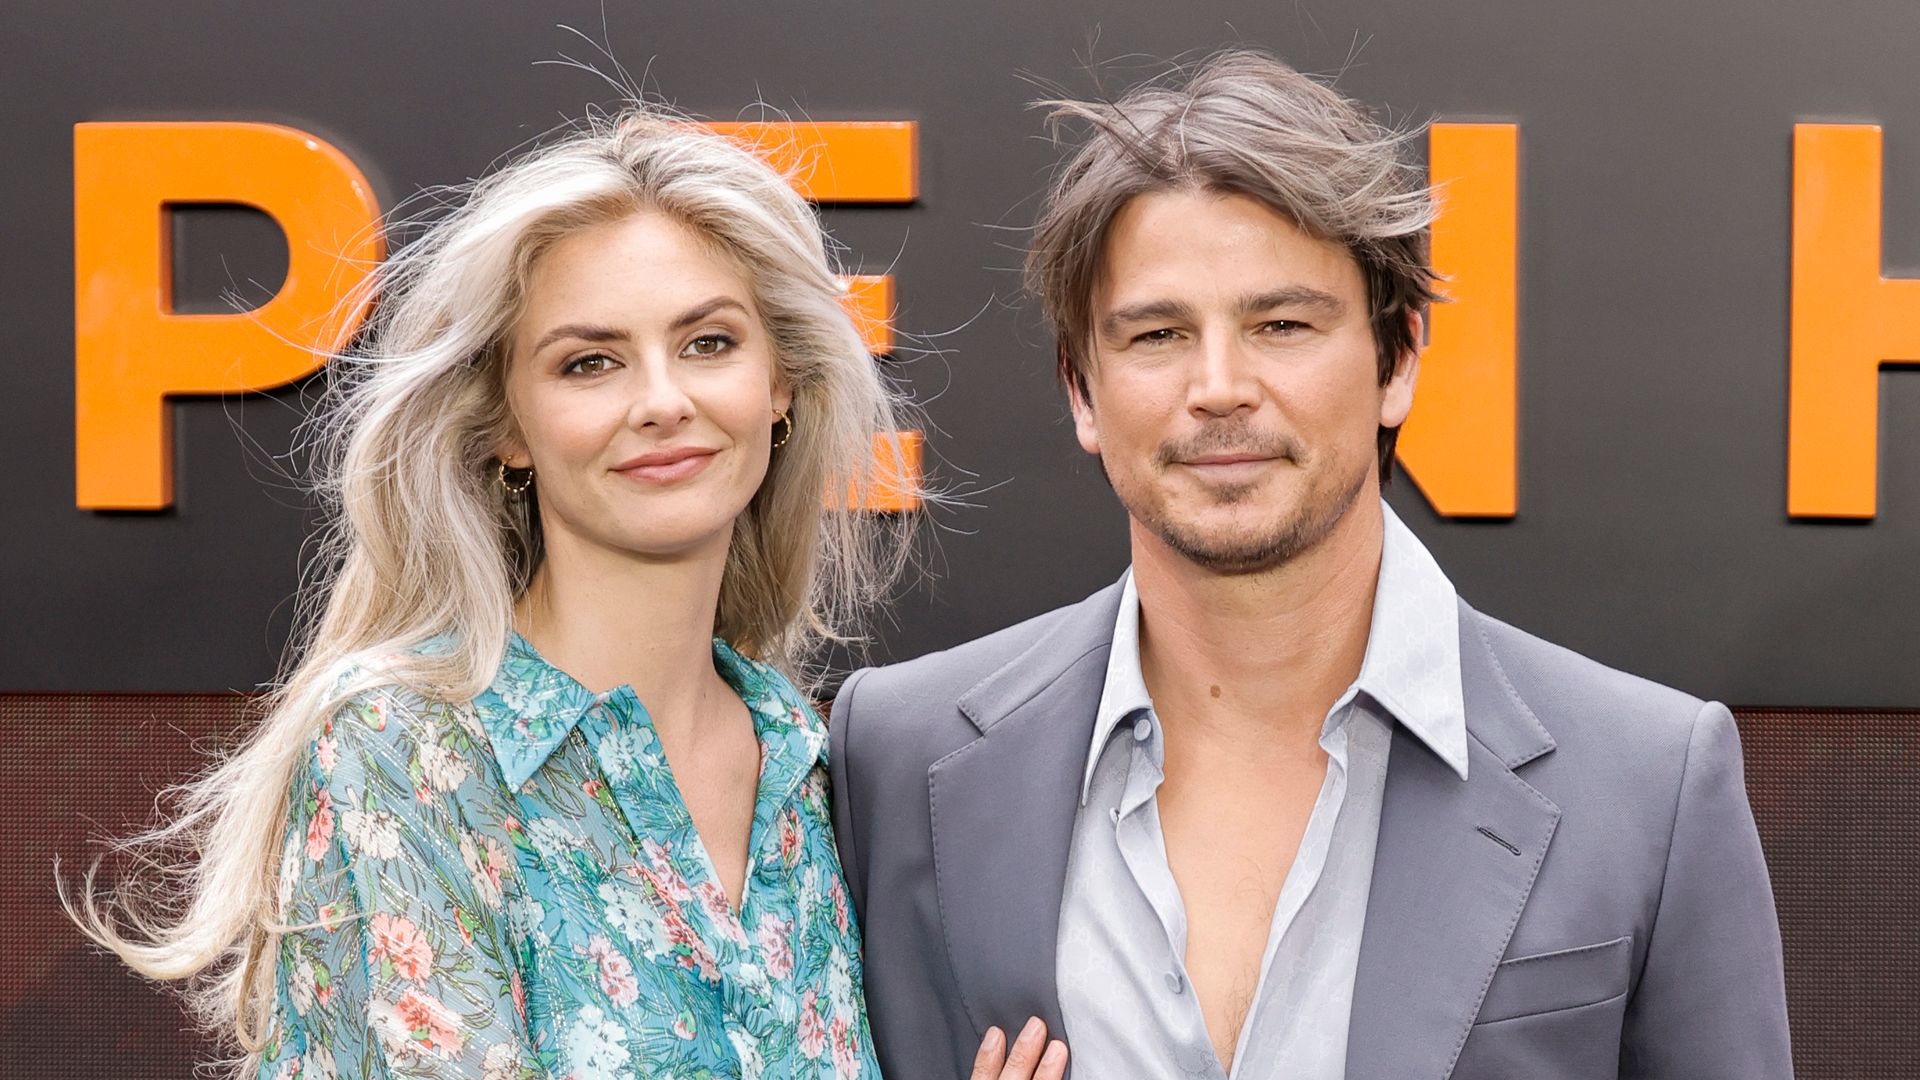 Josh Hartnett turns heads as he makes rare appearance with wife Tamsin on the red carpet